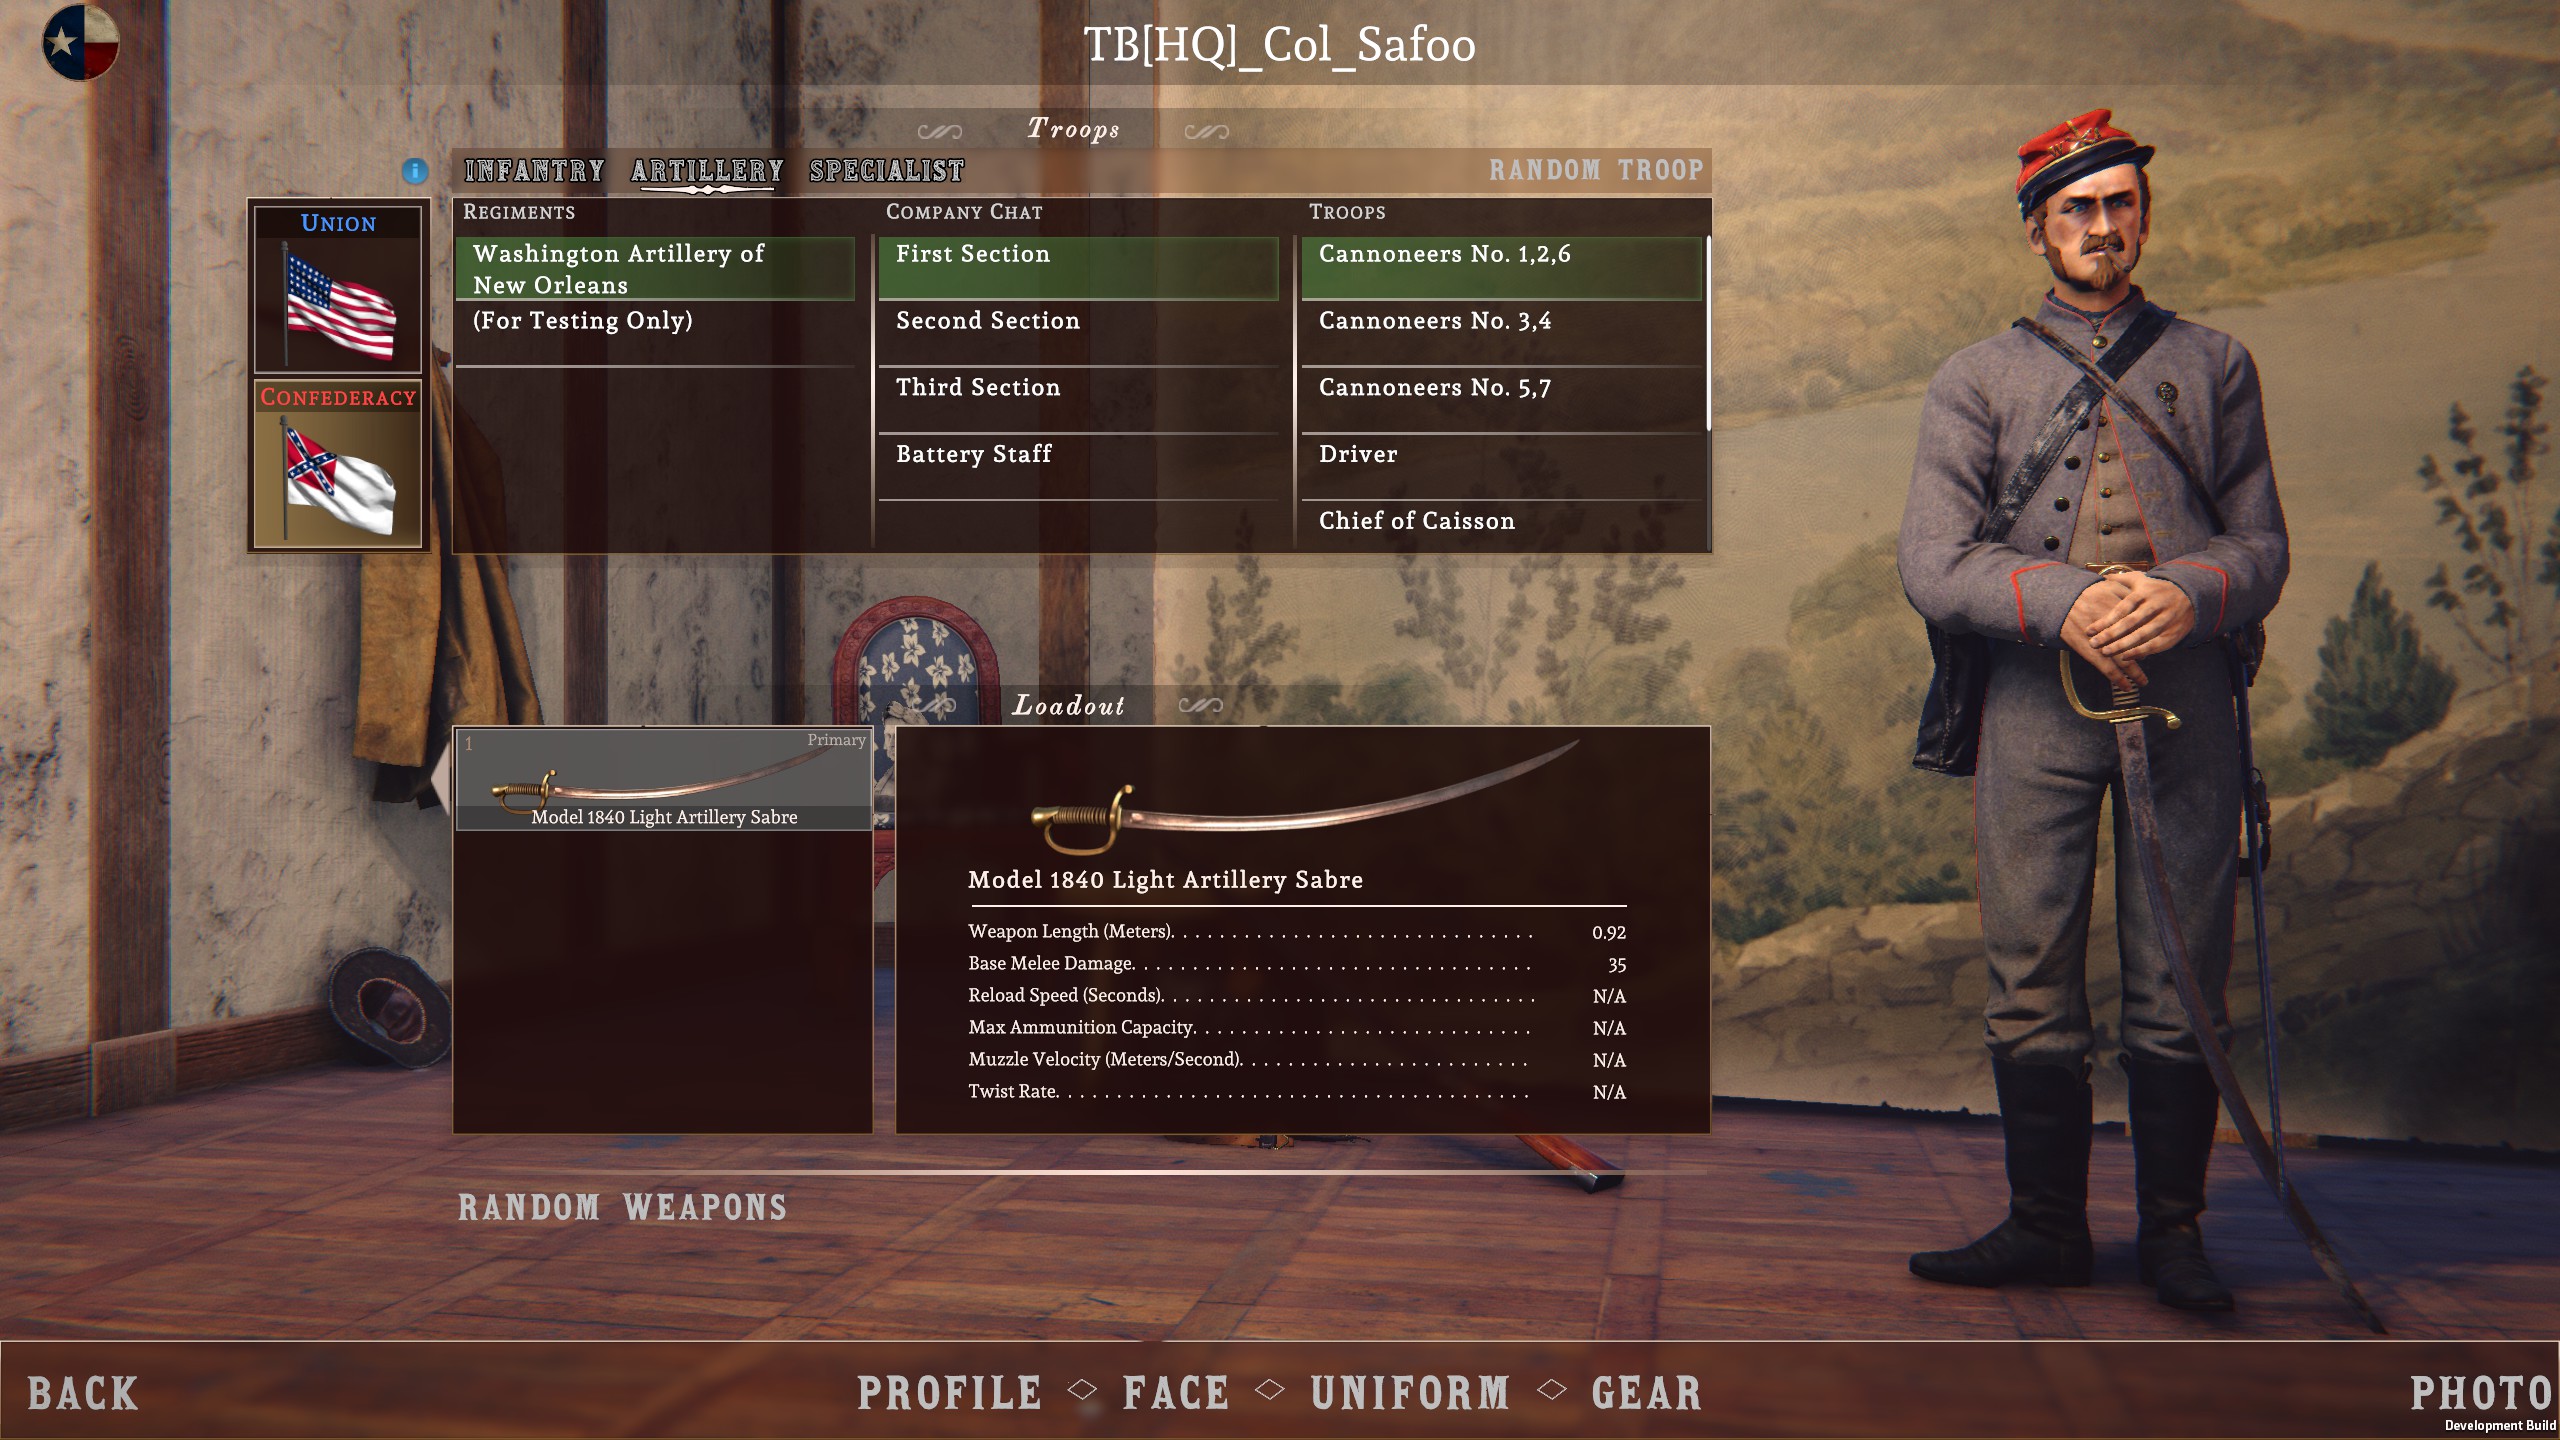 Battle Cry of Freedom - How to Customize Character & Uniform Guide - Artillery Branch - 553D0F9